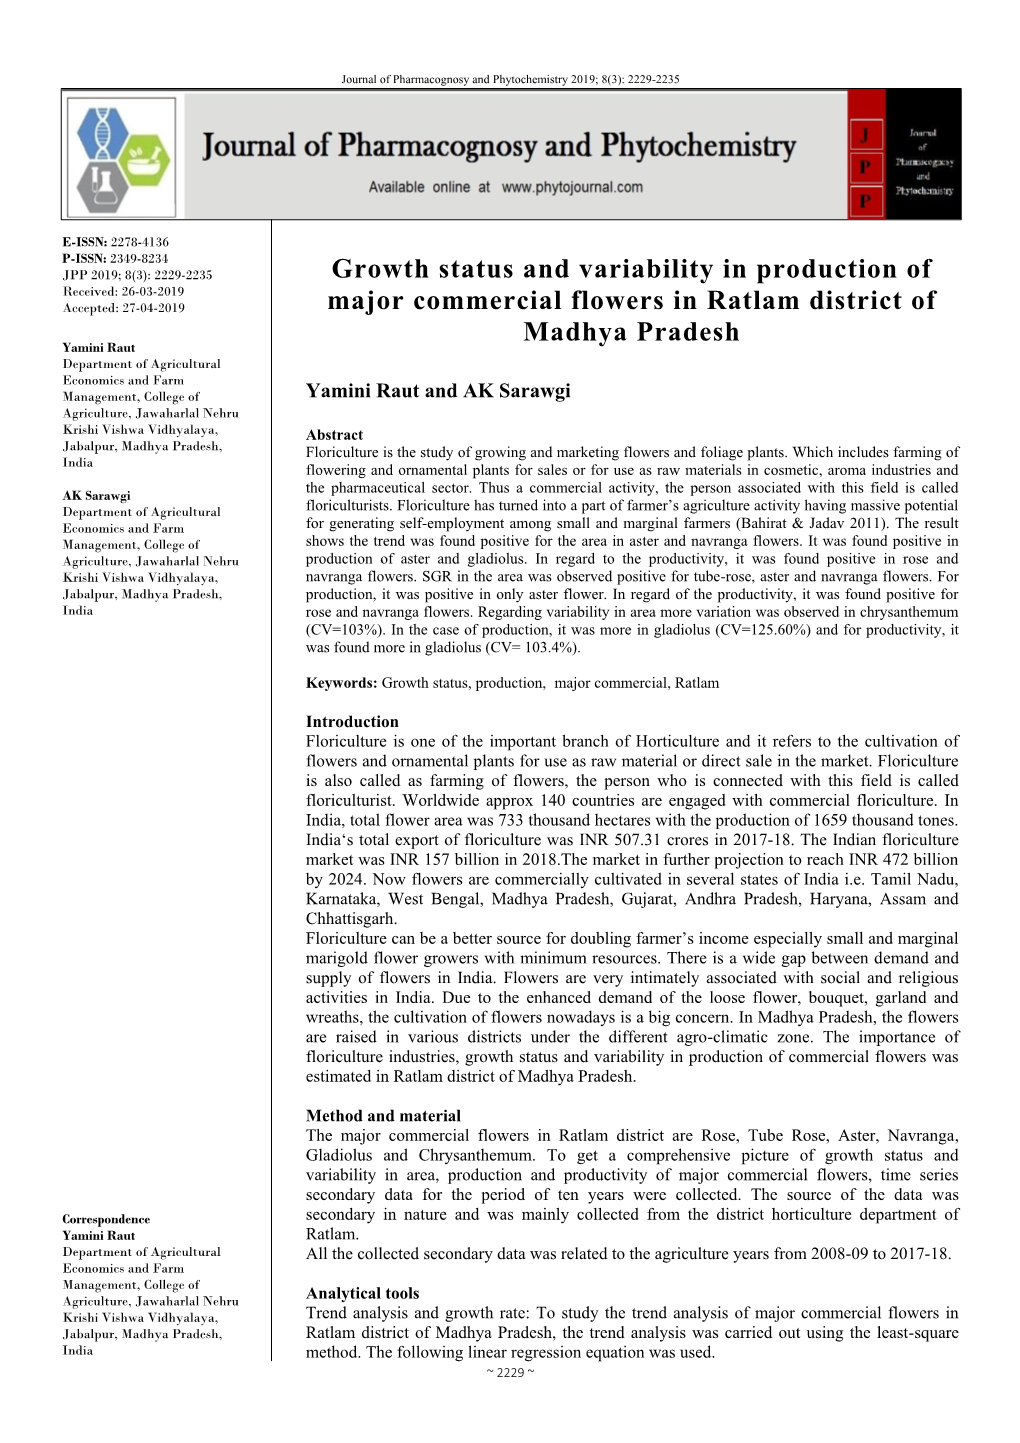 Growth Status and Variability in Production of Major Commercial